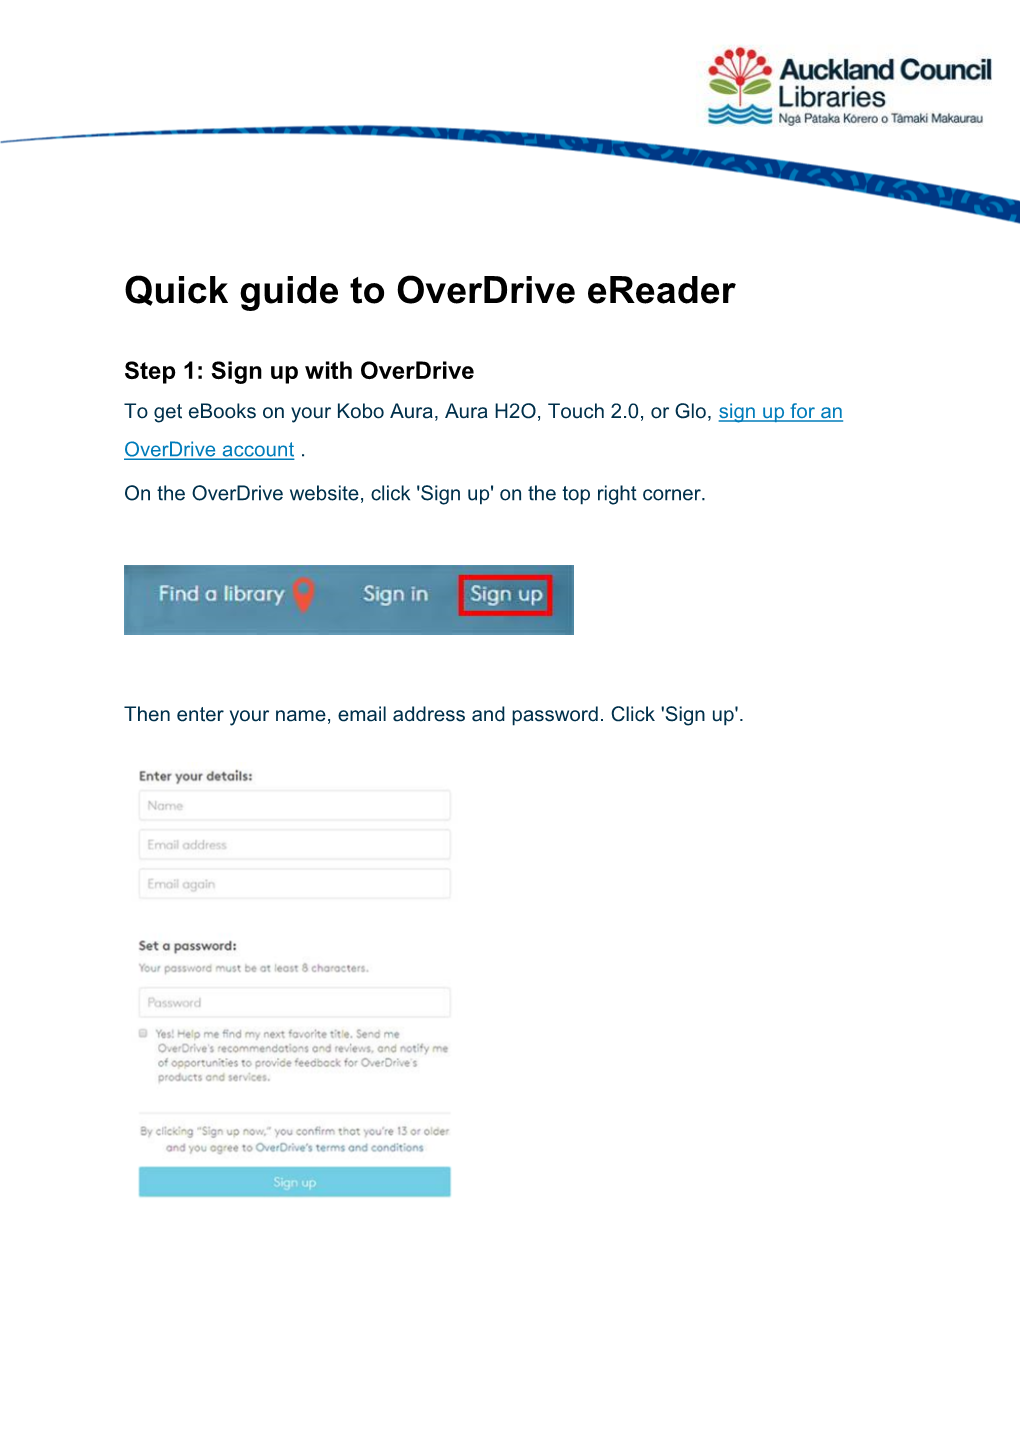 Quick Guide to Overdrive Ereader